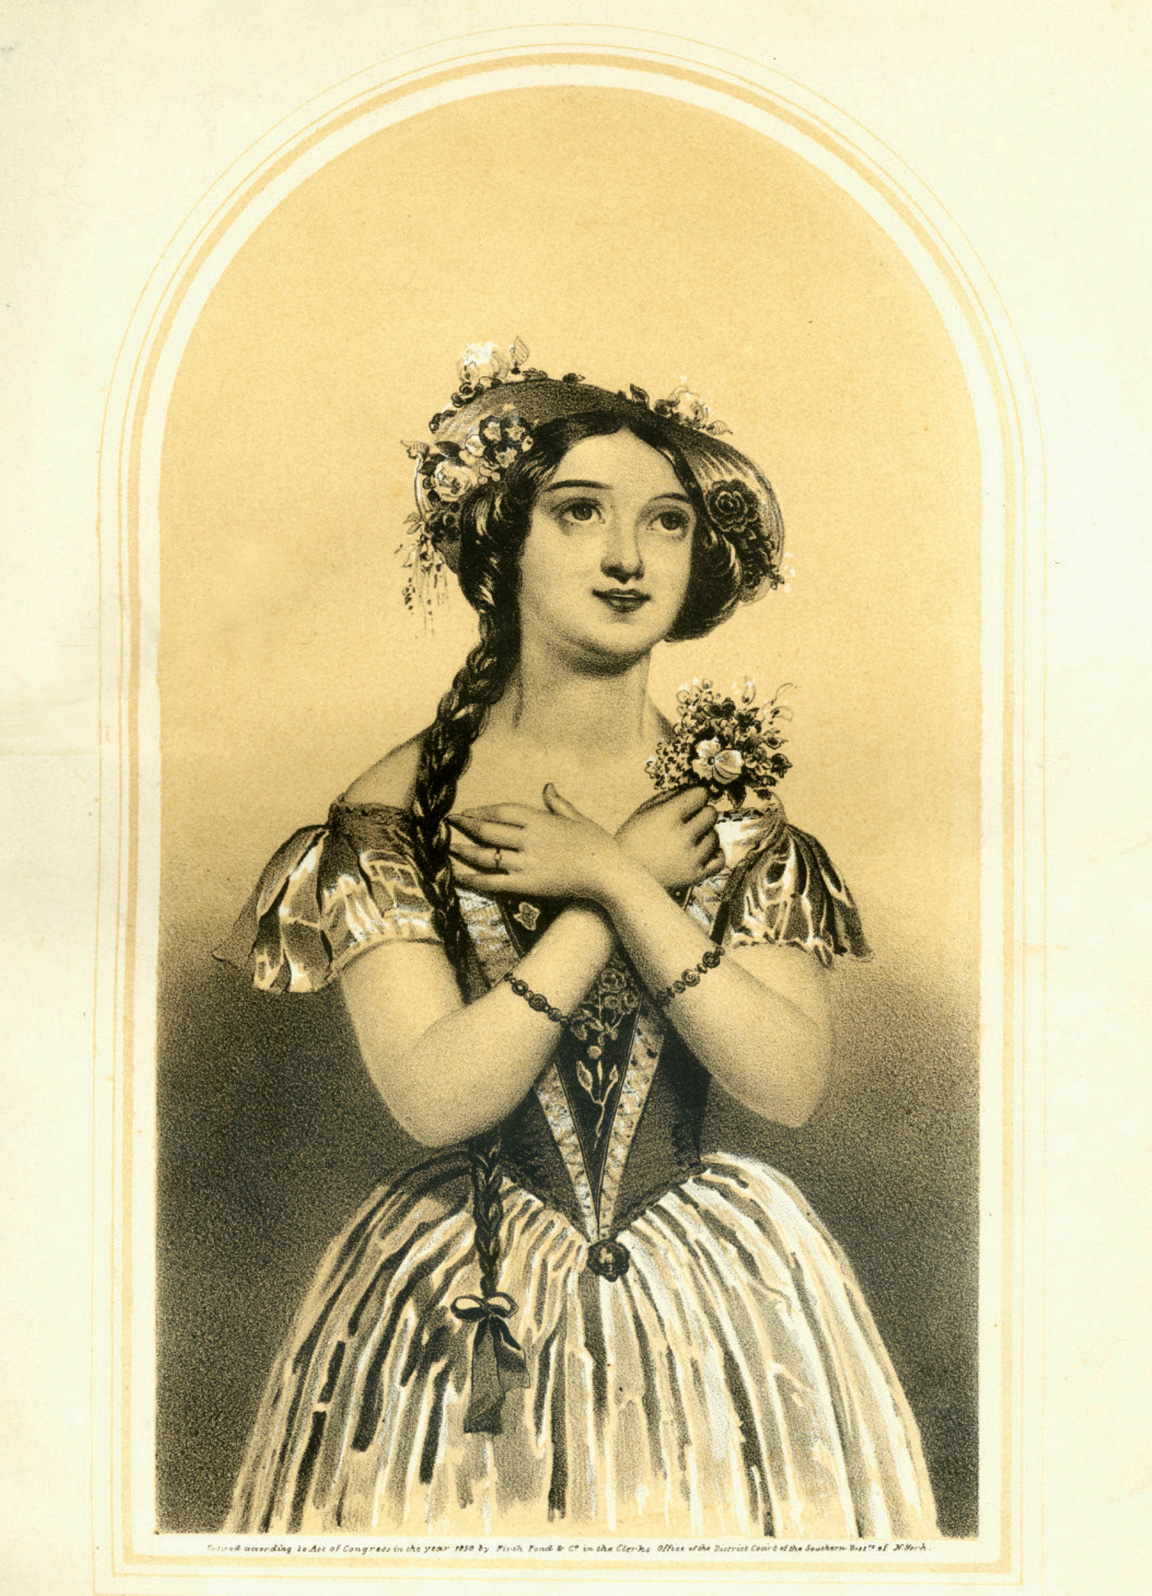 The frontispiece of composer Vincenzo Bellini’s sheet music of “Do Not Mingle, One Human Feeling,” illustrating Jenny Lind performing as Amina from the 1831 opera “La Sonnambula.”